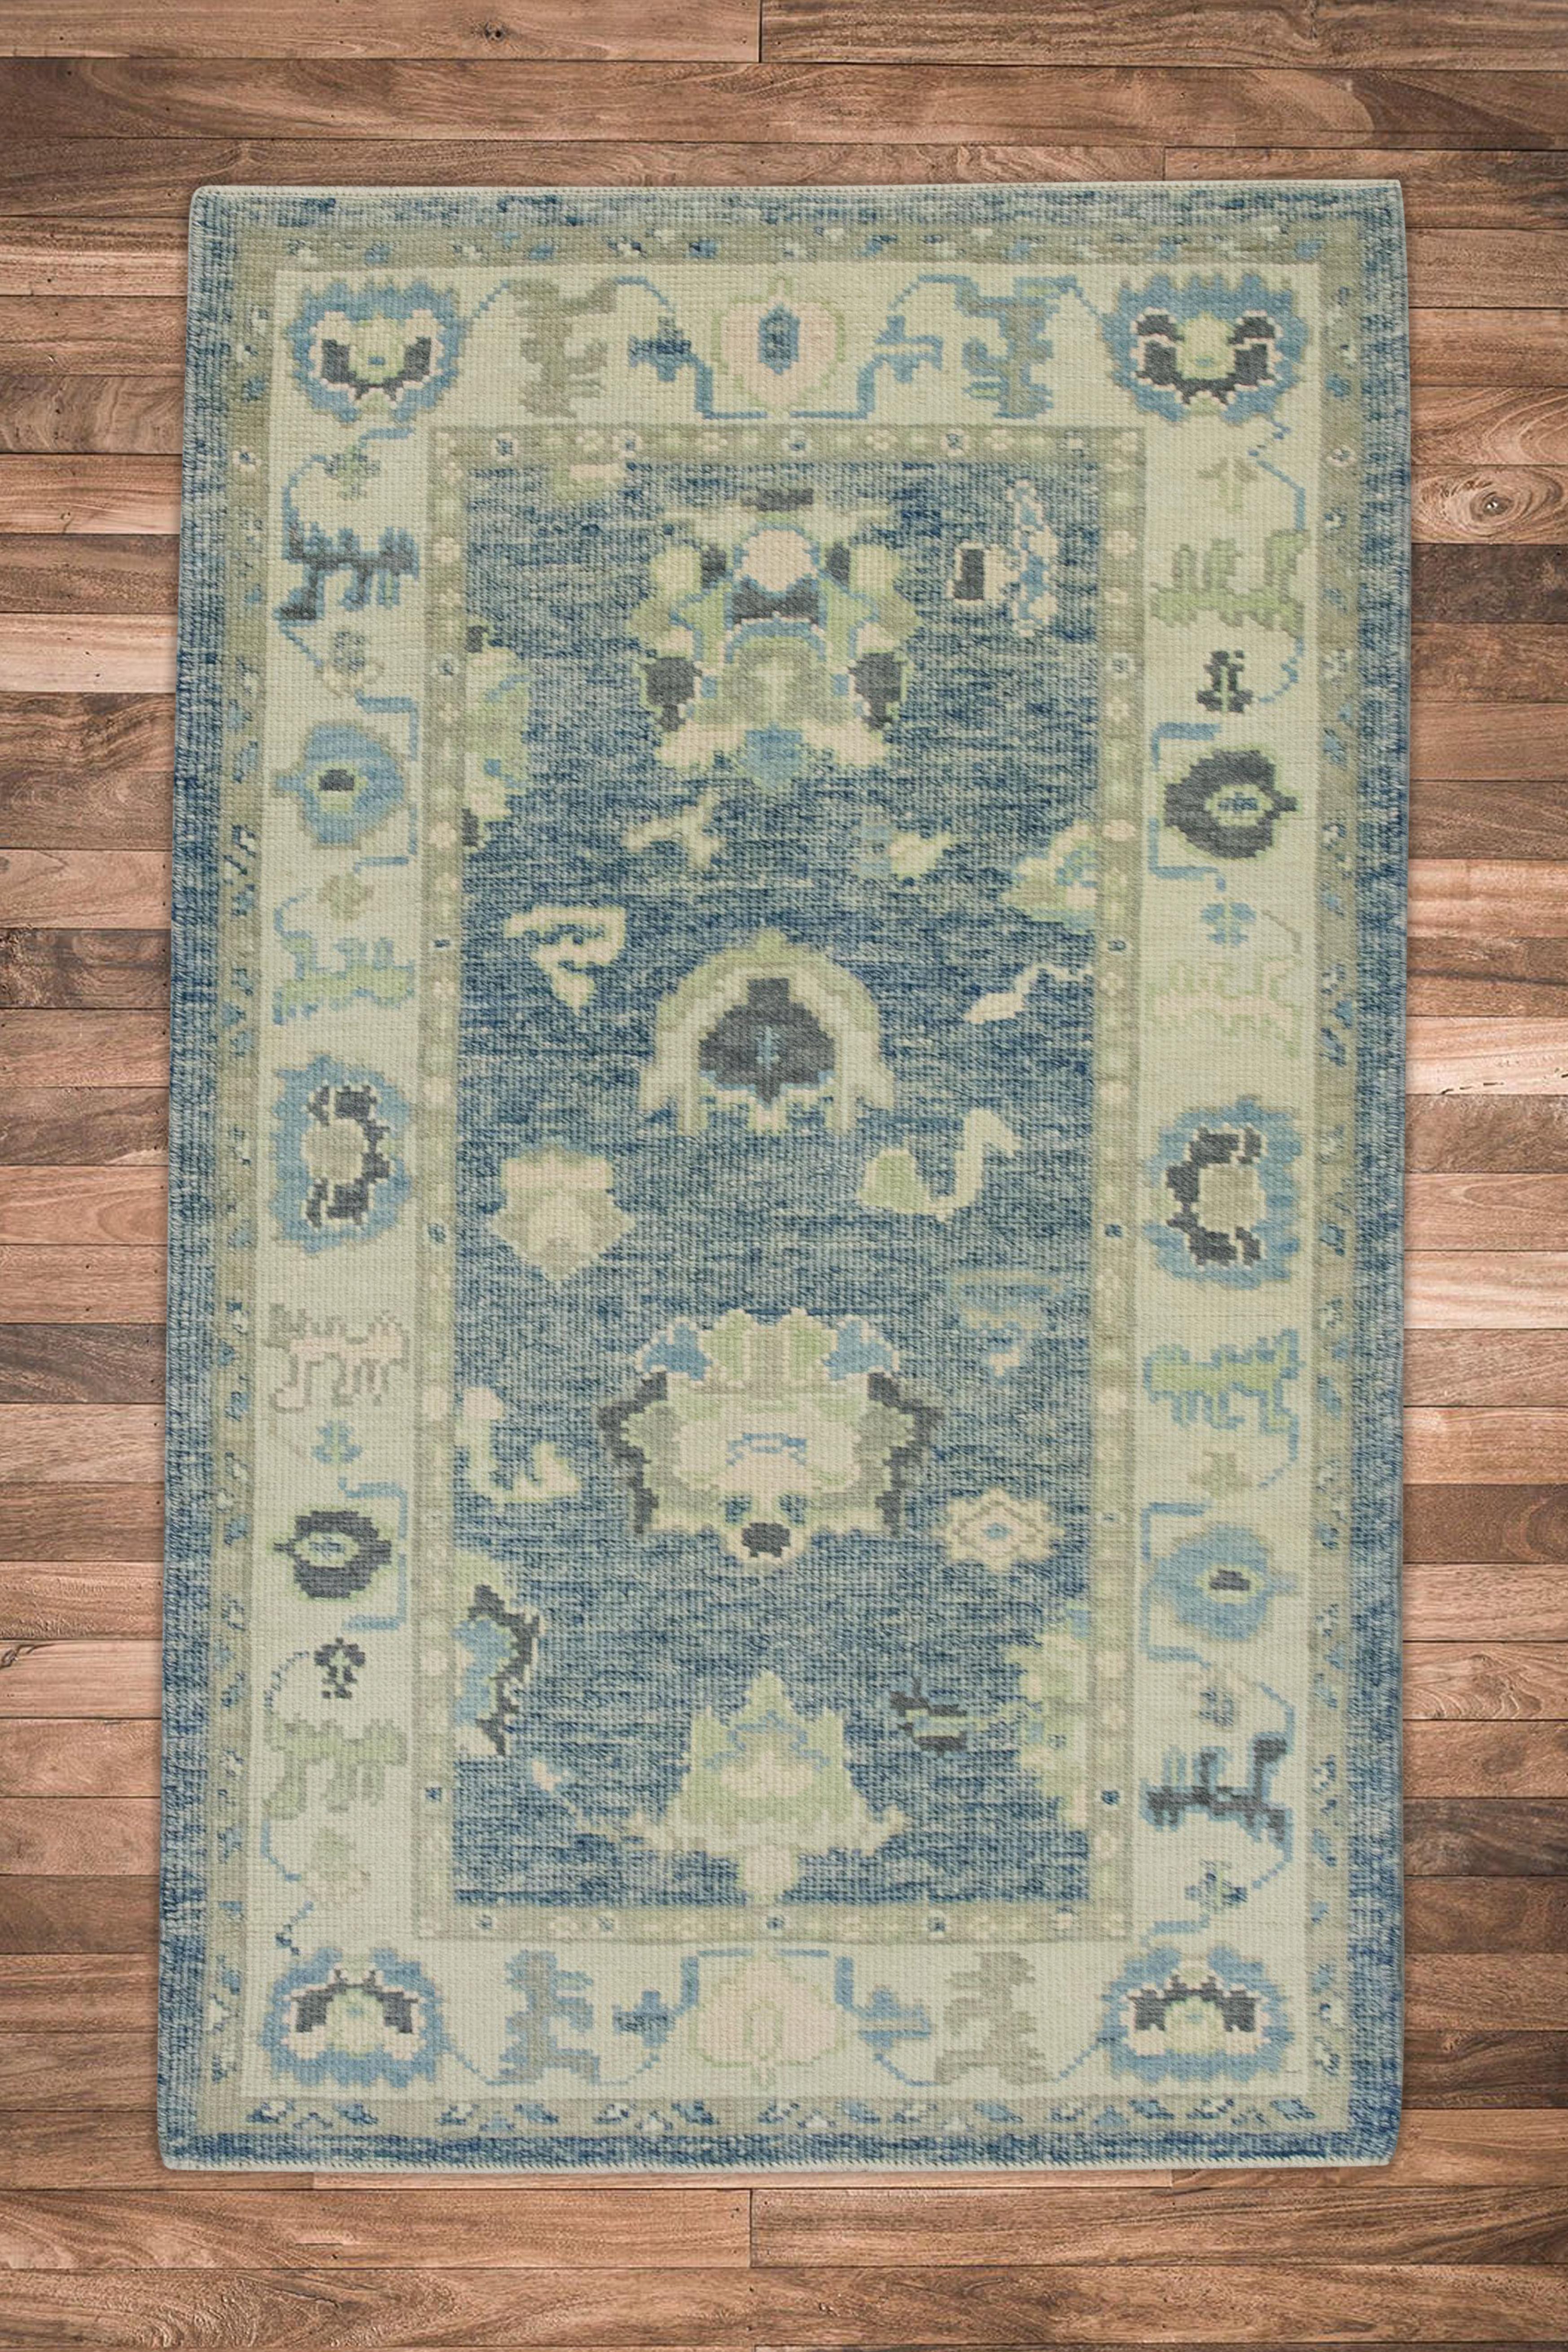 Contemporary Blue Floral Design Handwoven Wool Turkish Oushak Rug 3'2